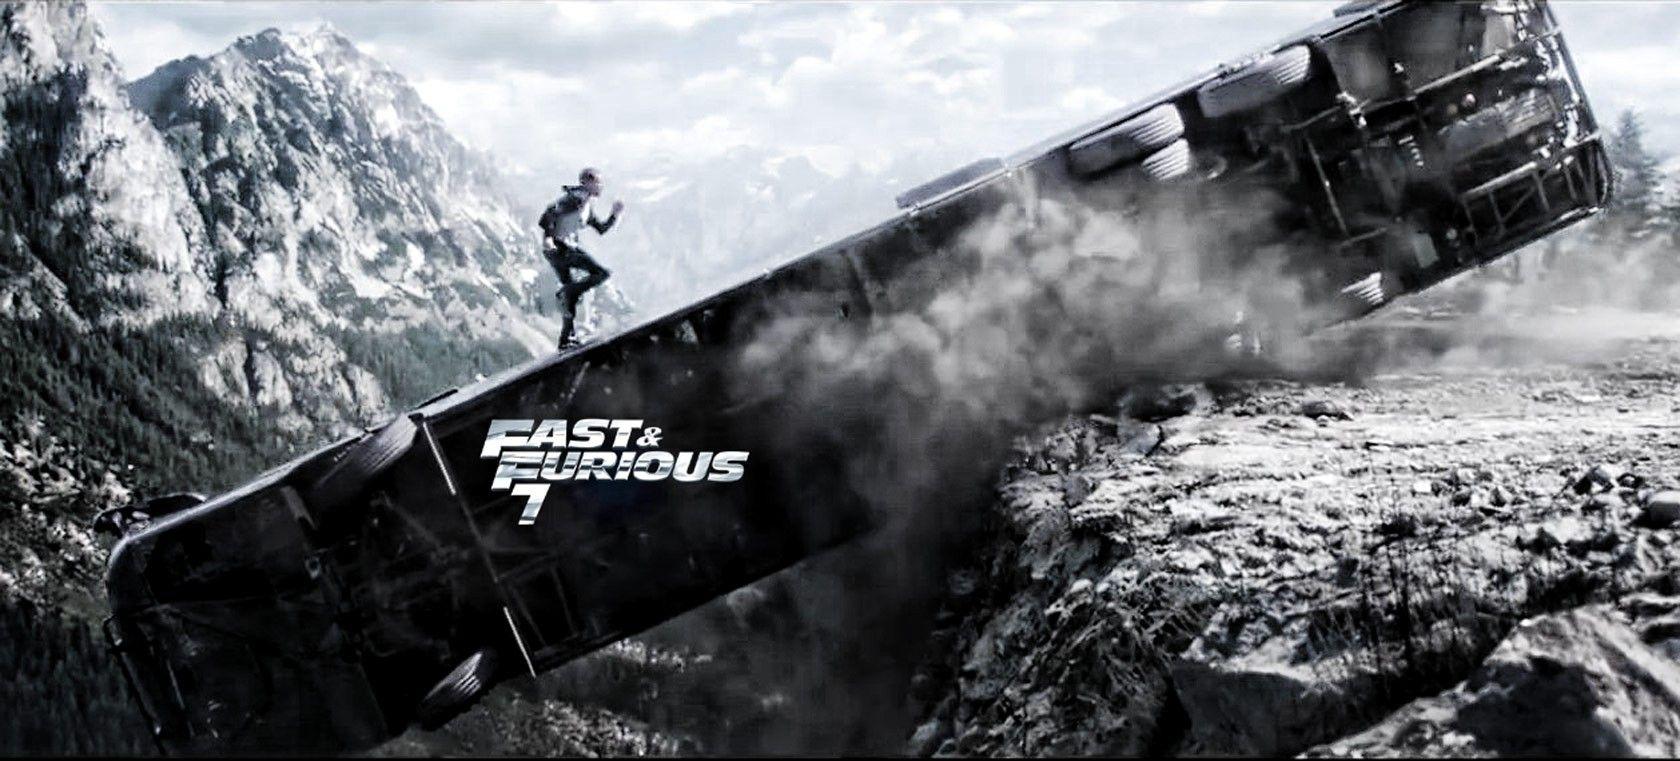 Furious 7 Wallpaper Image, HD Picture, Background